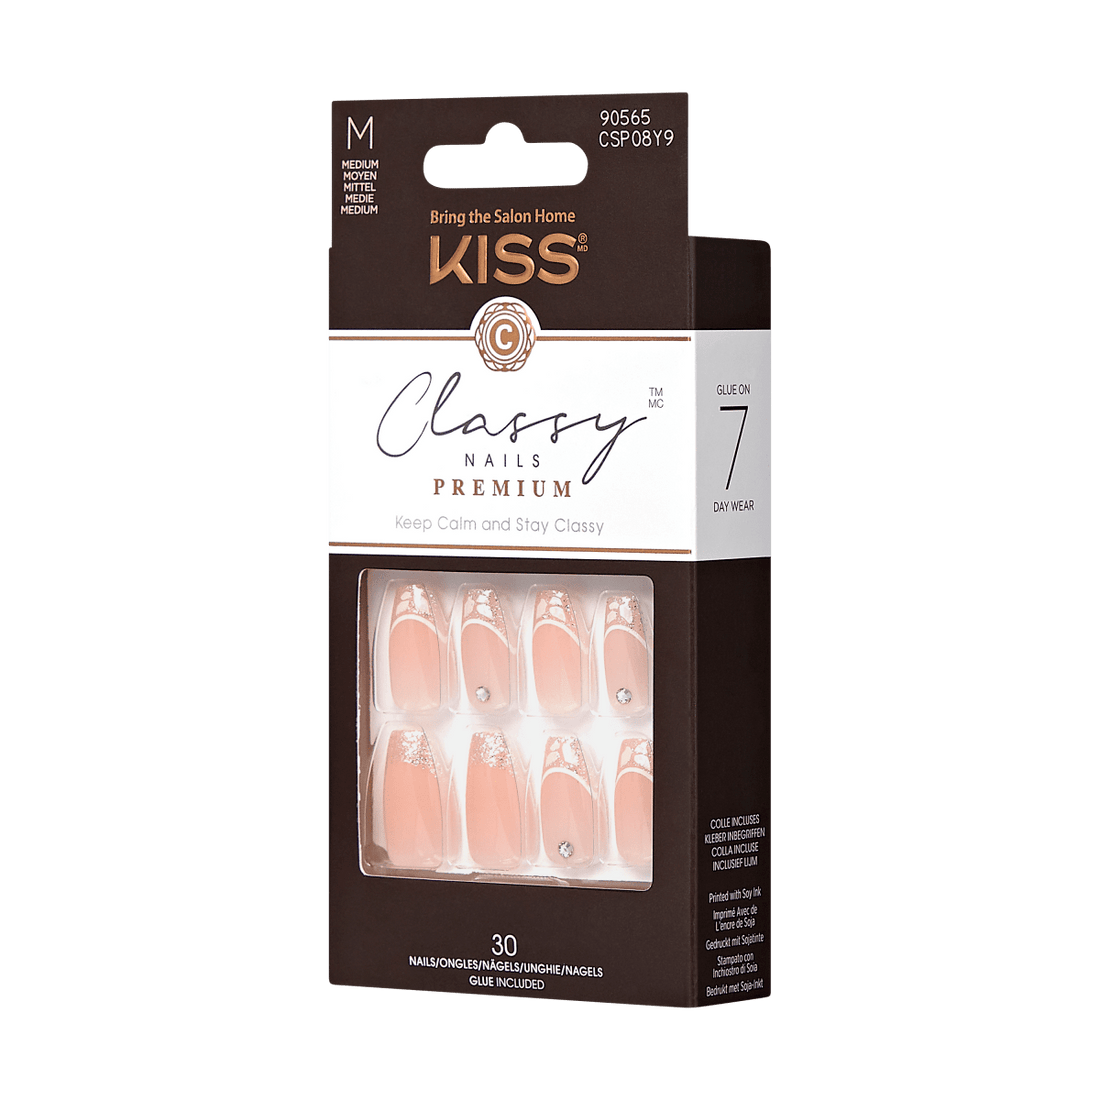 KISS Classy Nails Premium, Press-On Nails, The Big Day, Beige, Med Coffin, 30ct